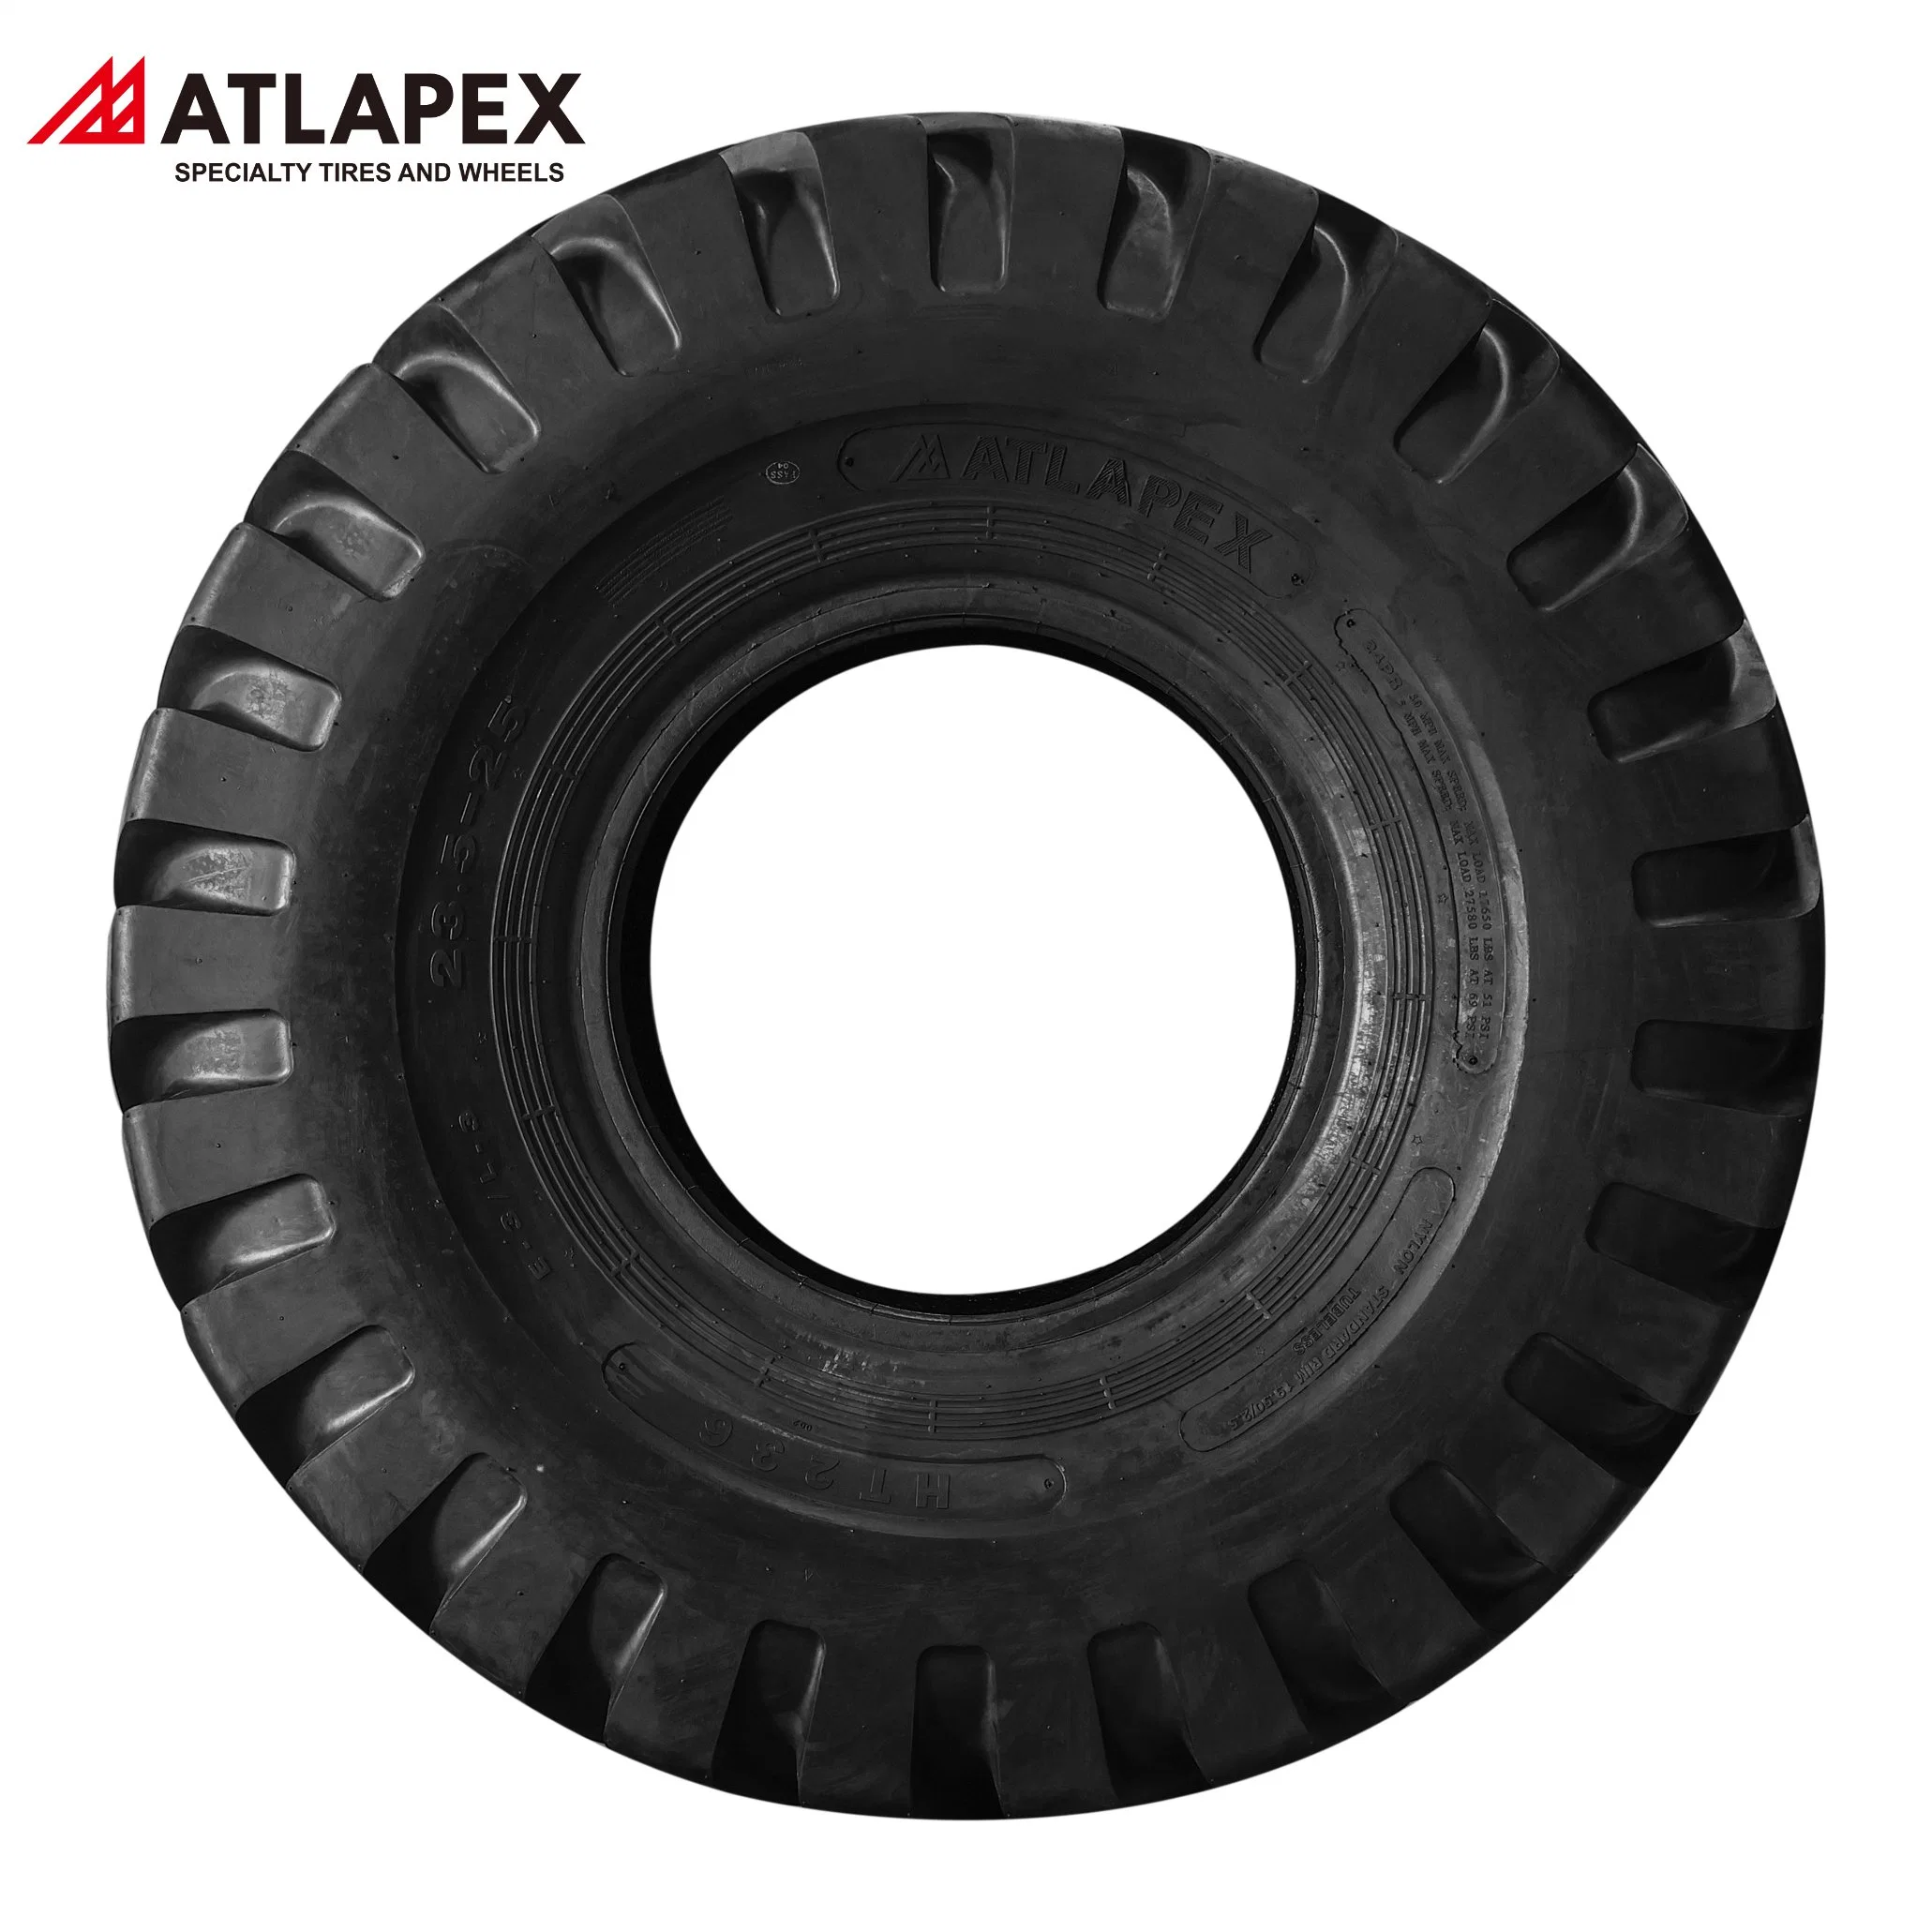 High quality/High cost performance off The Road Skid Steer Wheel Loader OTR Solid Rubber E3l3 L4 L5 Patterns OTR Tire